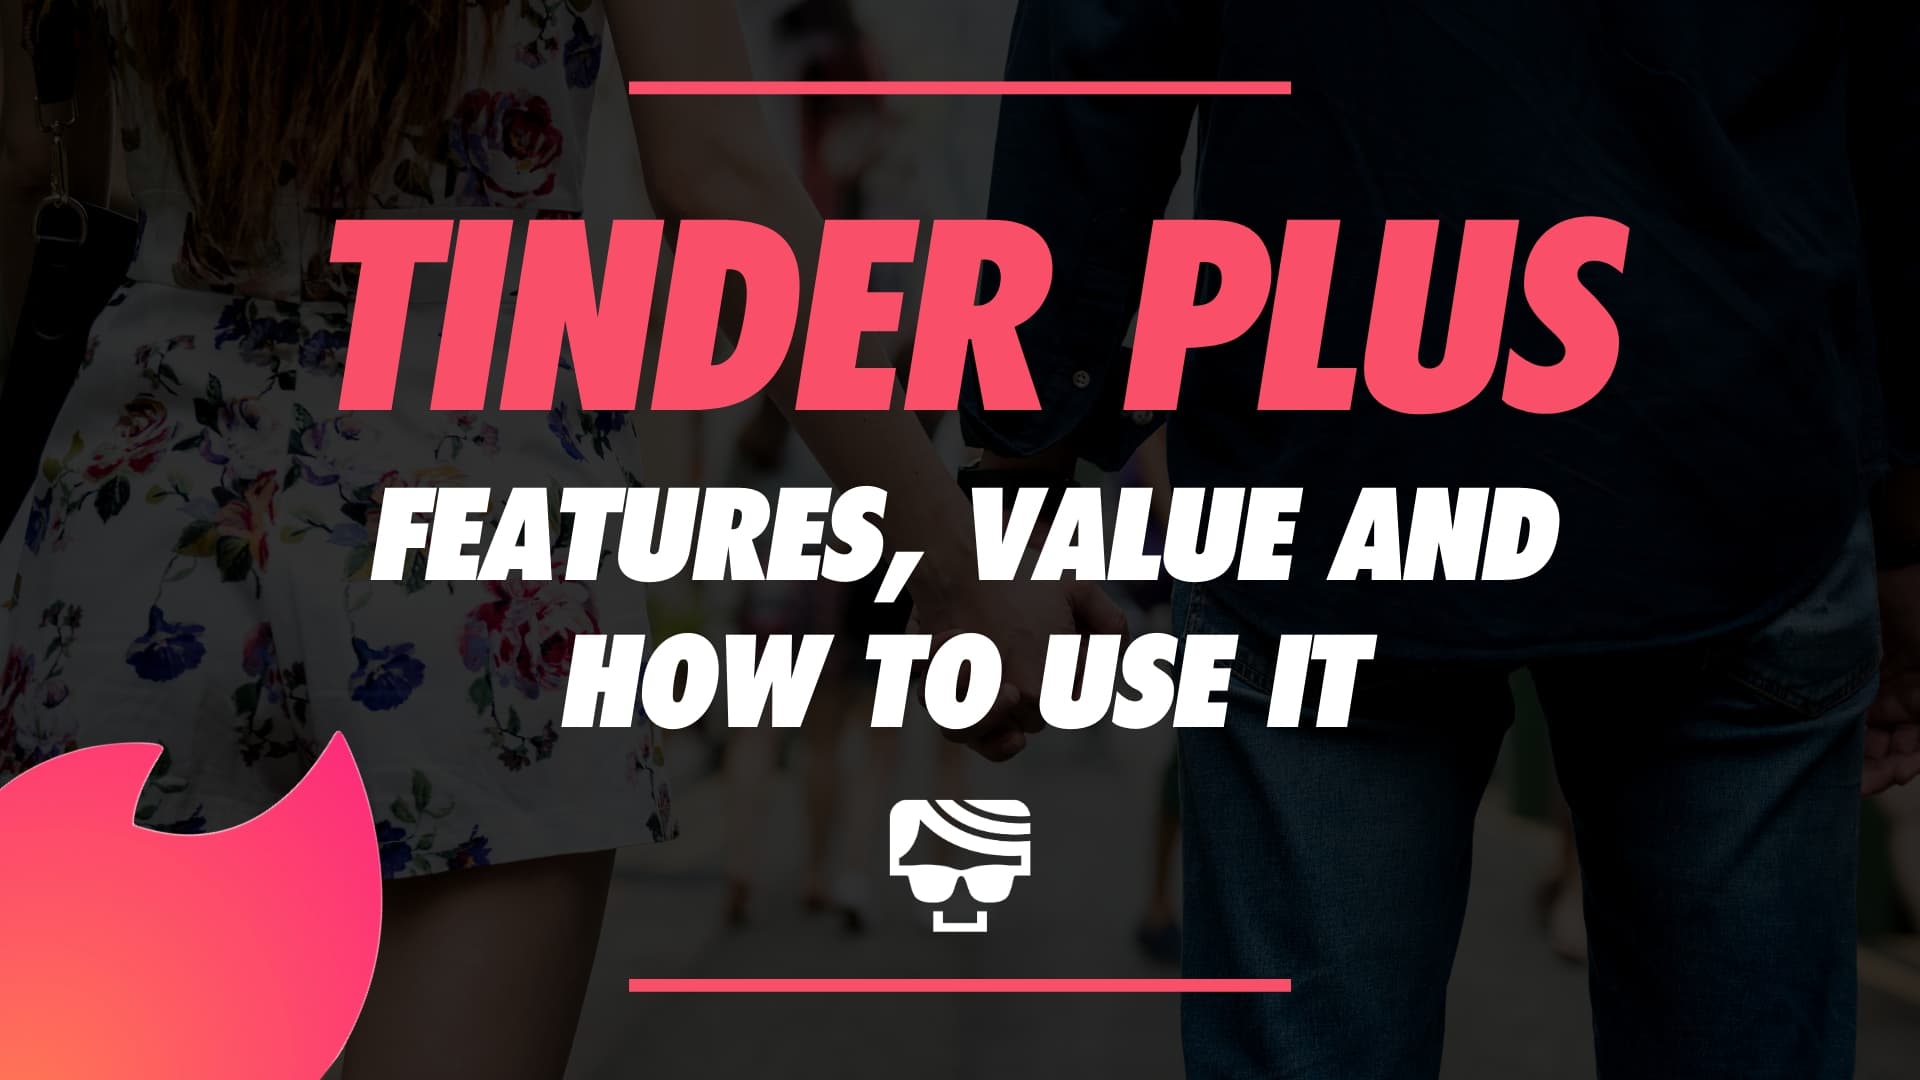 Tinder Plus Features | How To Use Them And If They’re Worth It In 2022